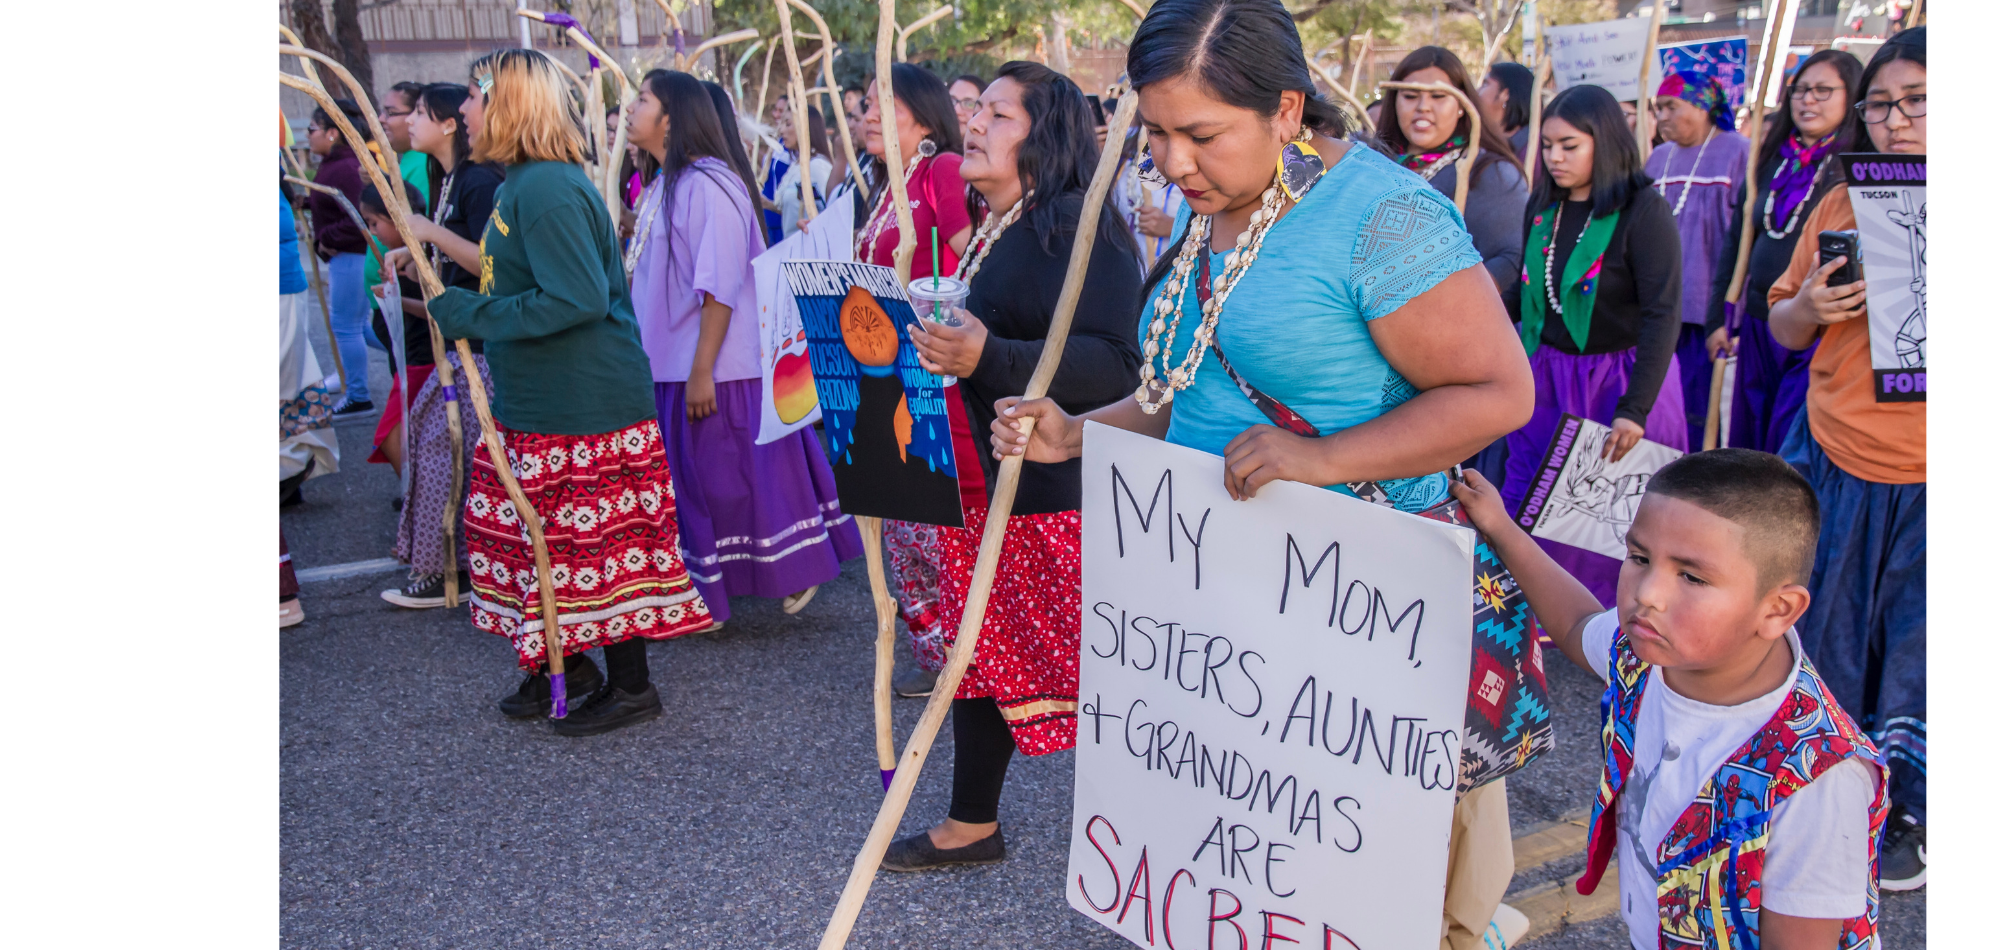 Tohono Women led the Tucson 2019 Women’s March with a show of strength, resilience and power. This woman’s sign said: My Mom, Sisters, Aunties and Grandmas are sacred. Her son was by her side. International Women’s Day